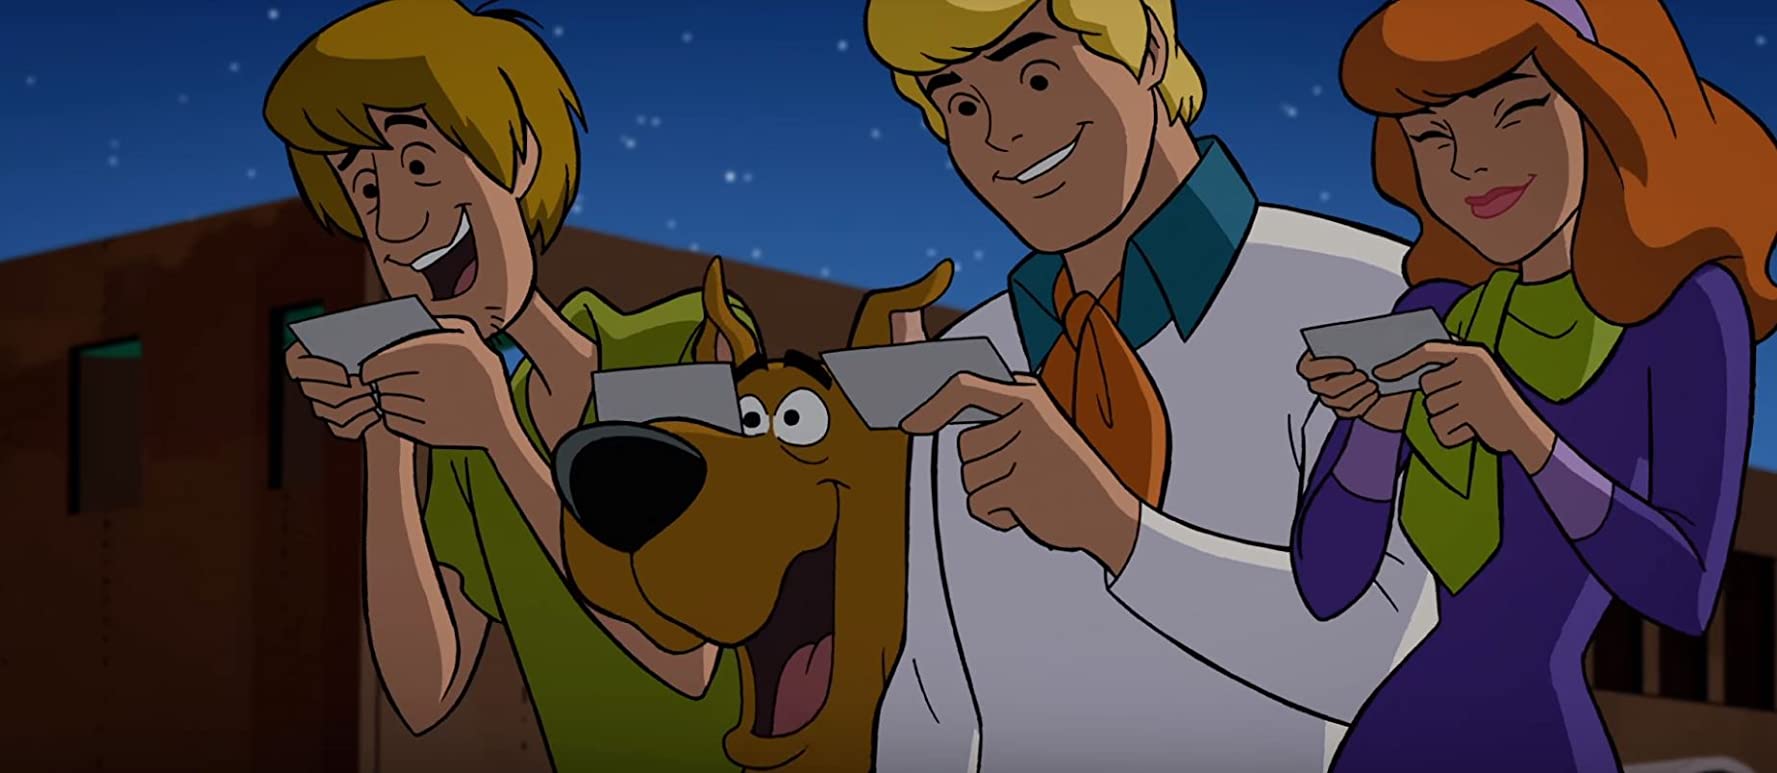 Scooby-Doo and Batman - The unsolved case